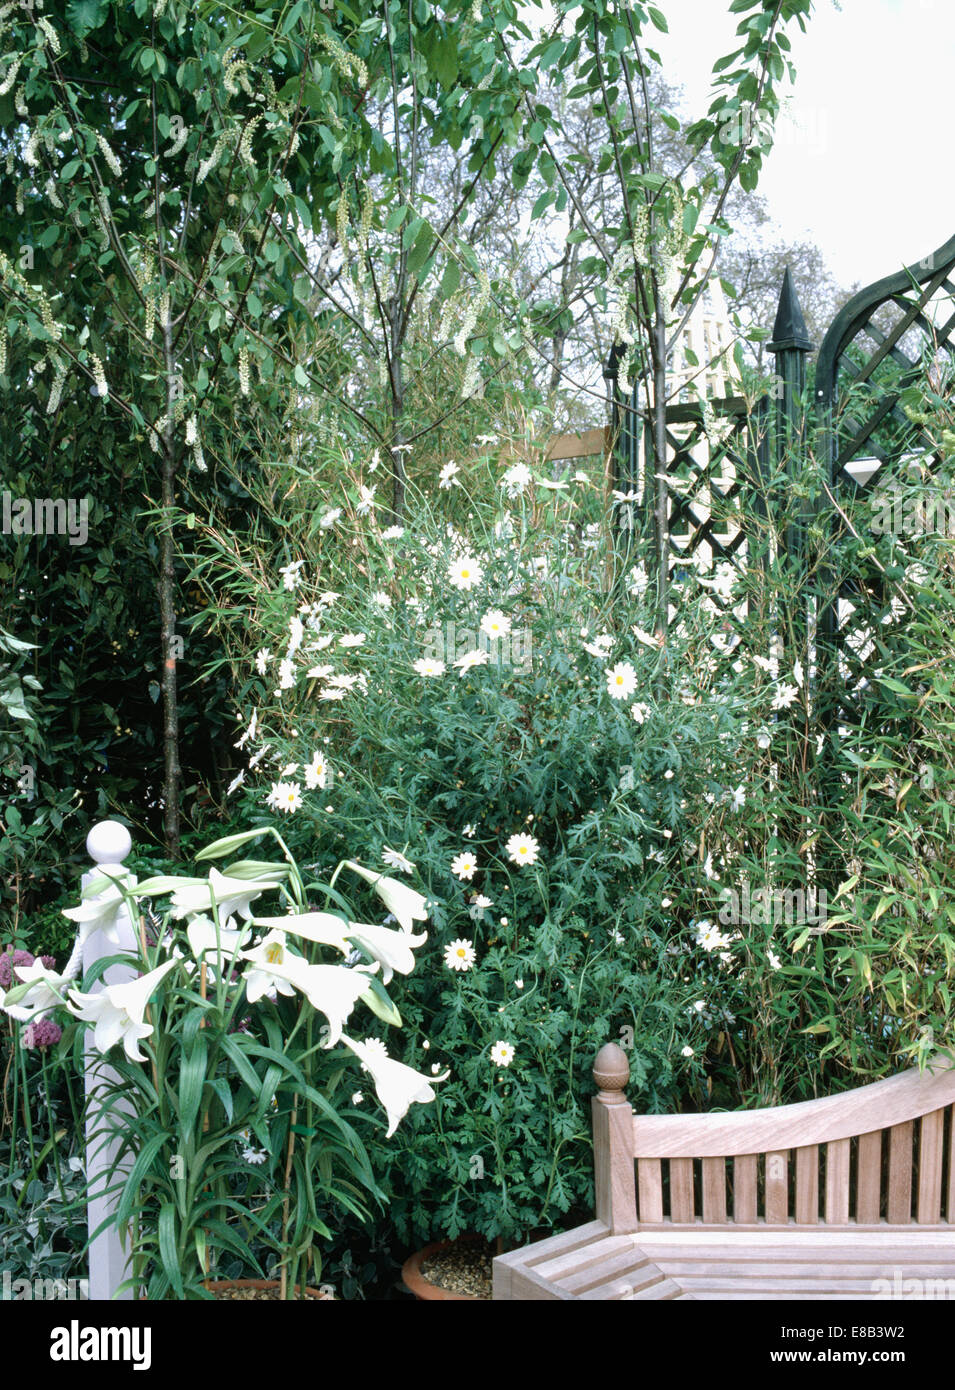 White Lilium Longiflorum' and Argyranthemum 'Frutescens' in front of small trees in patio corner of the garden Stock Photo